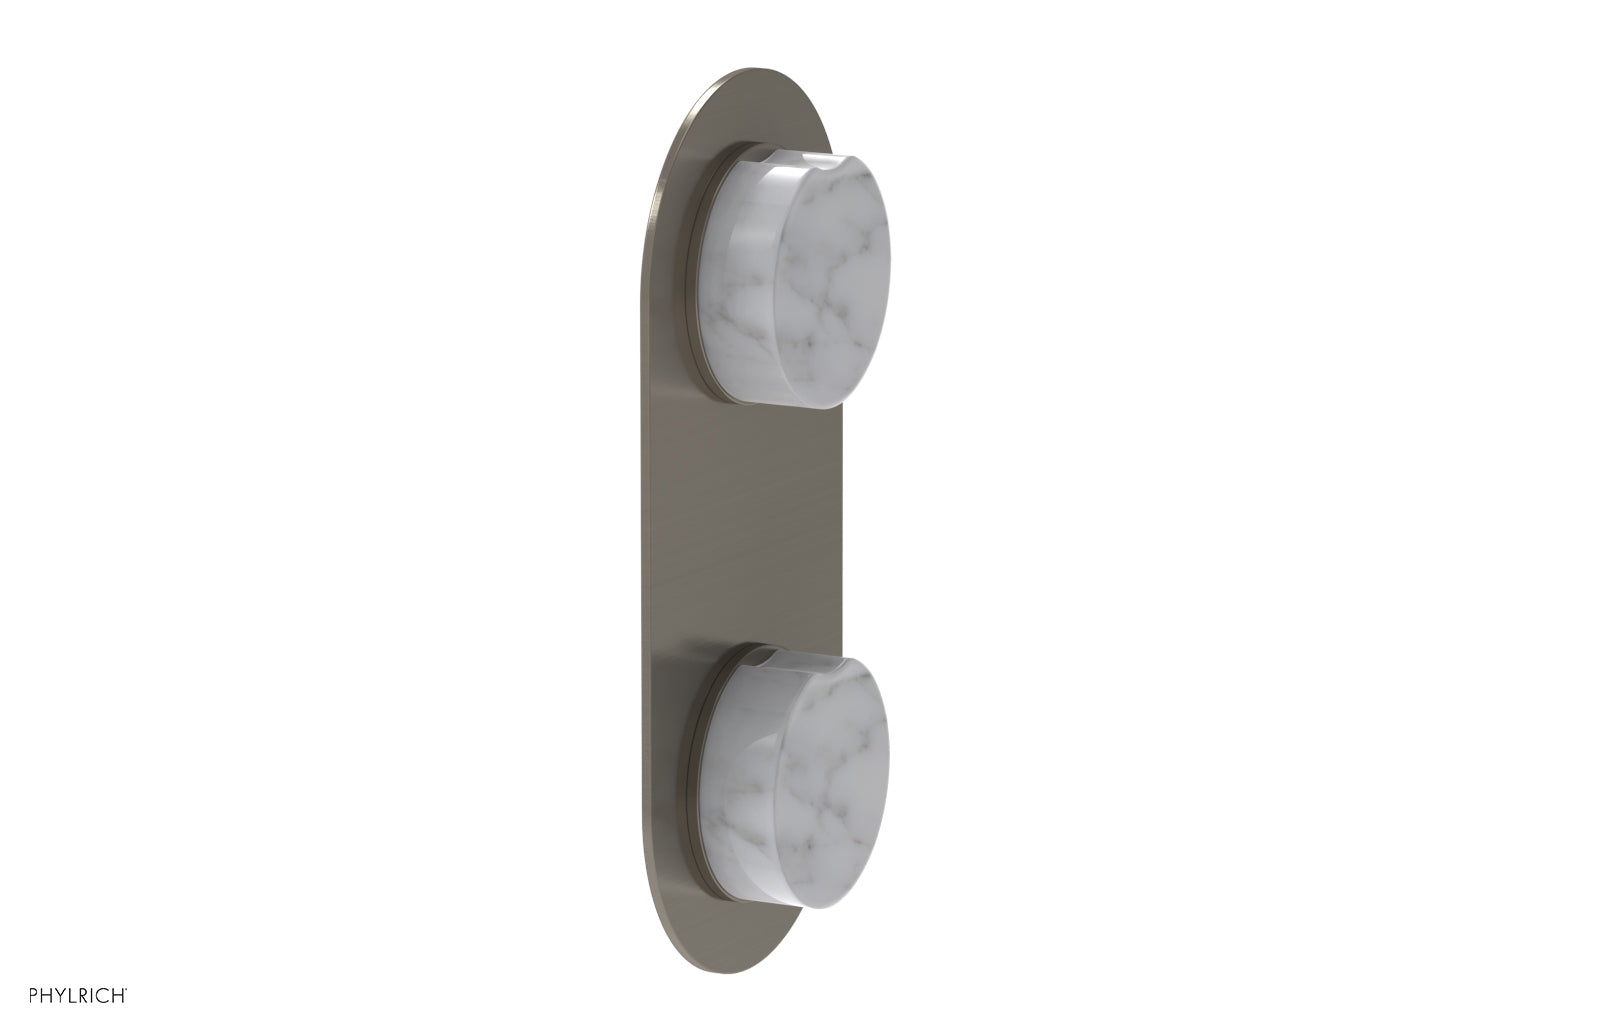 Phylrich CIRC Thermostatic Valve with Volume Control or Diverter - White Marble Handle